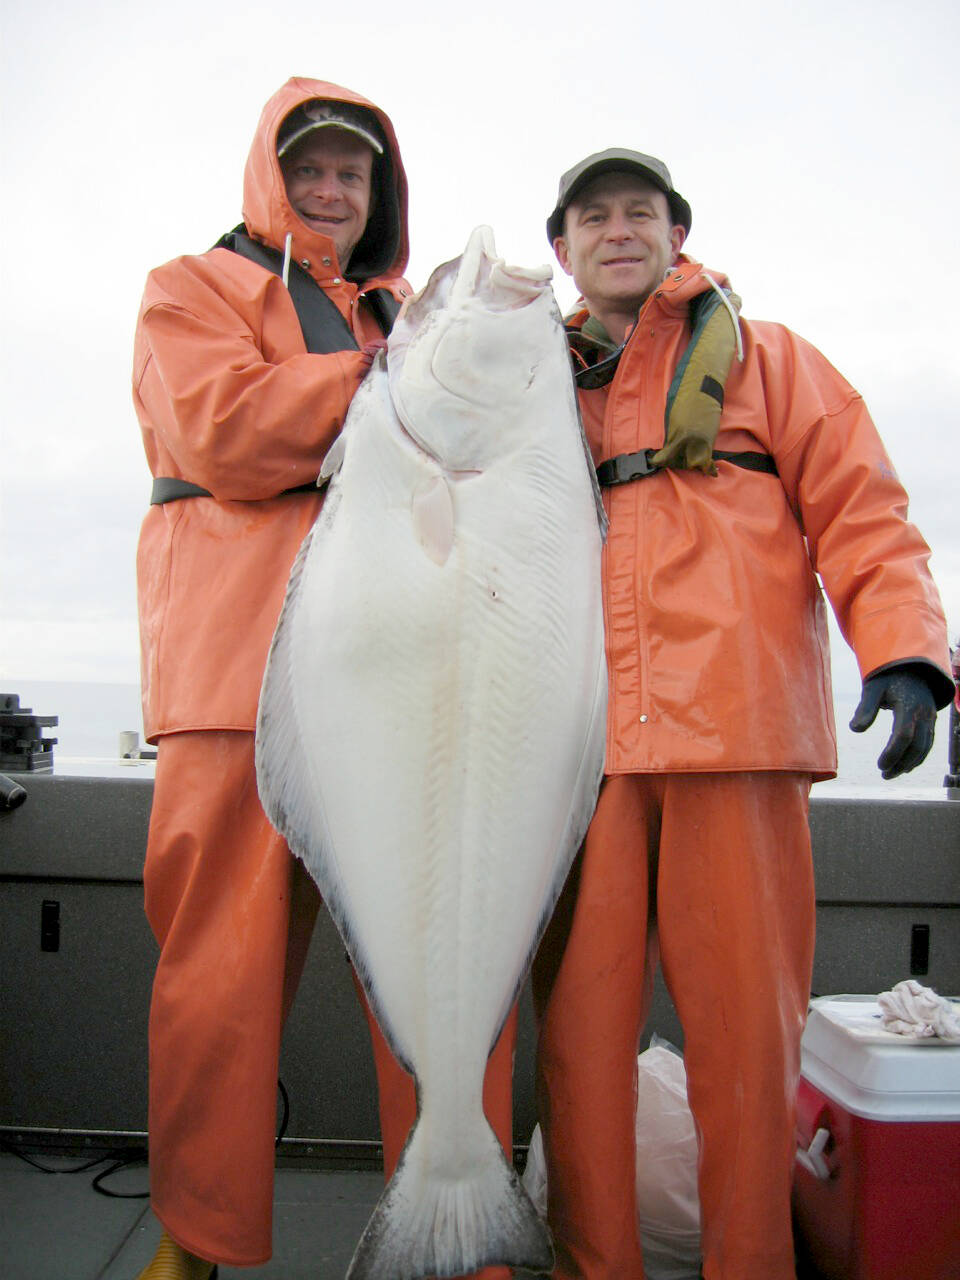 The Department of Fish and Wildlife has added days to the halibut season and increased the daily limit. (David Bergeron/WDFW)